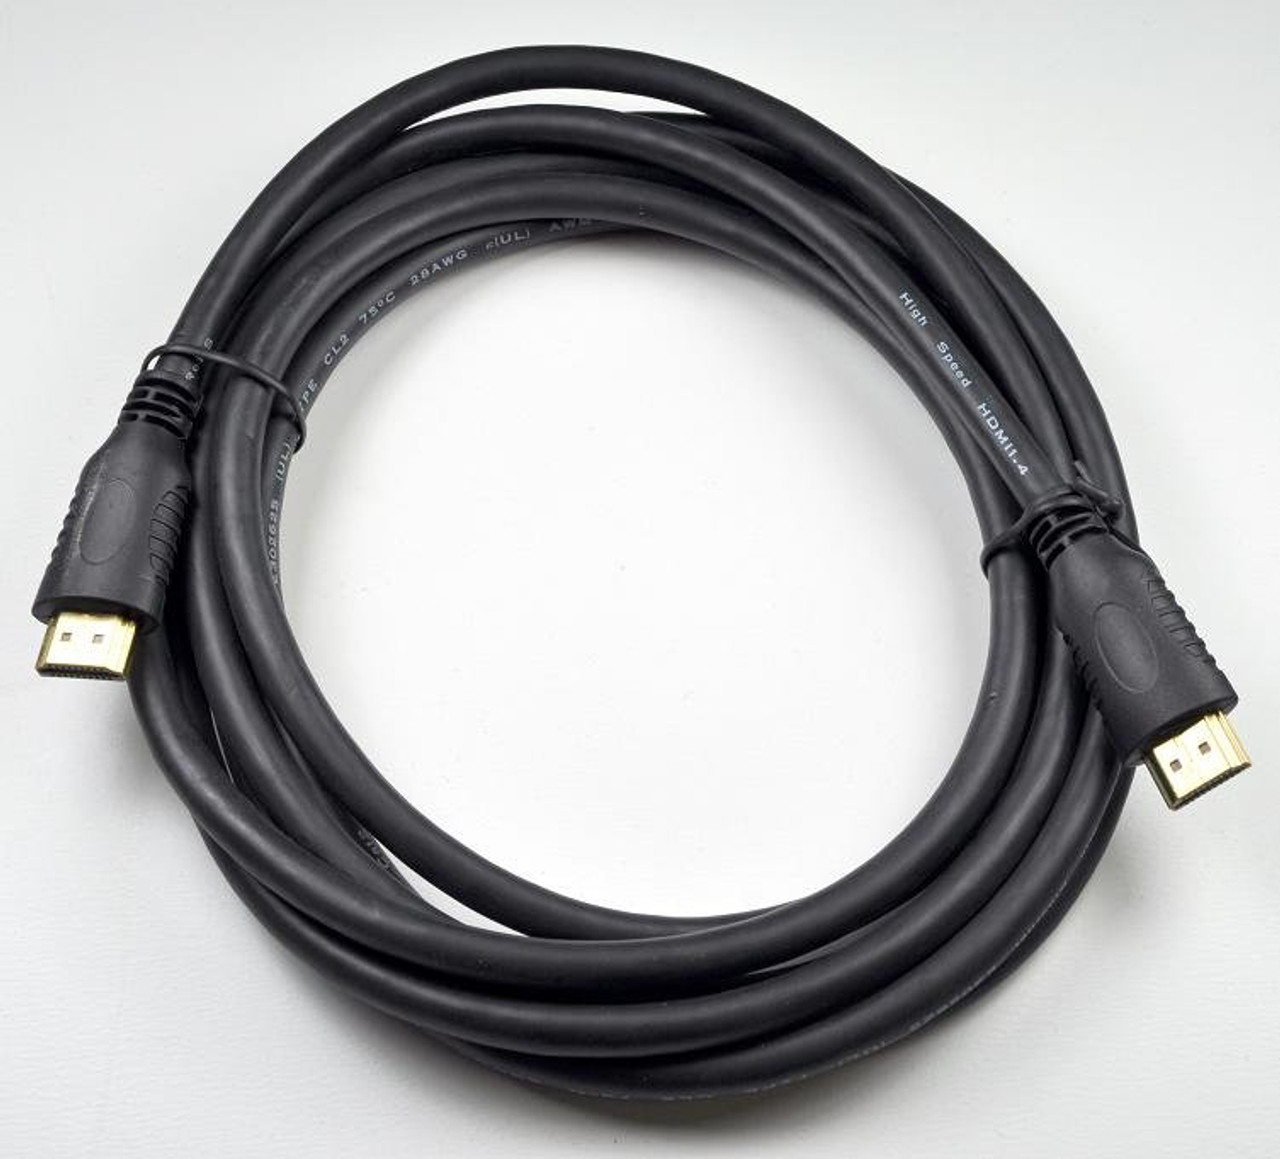 High Speed HDMI Cable with Ethernet 28AWG - 15 Feet